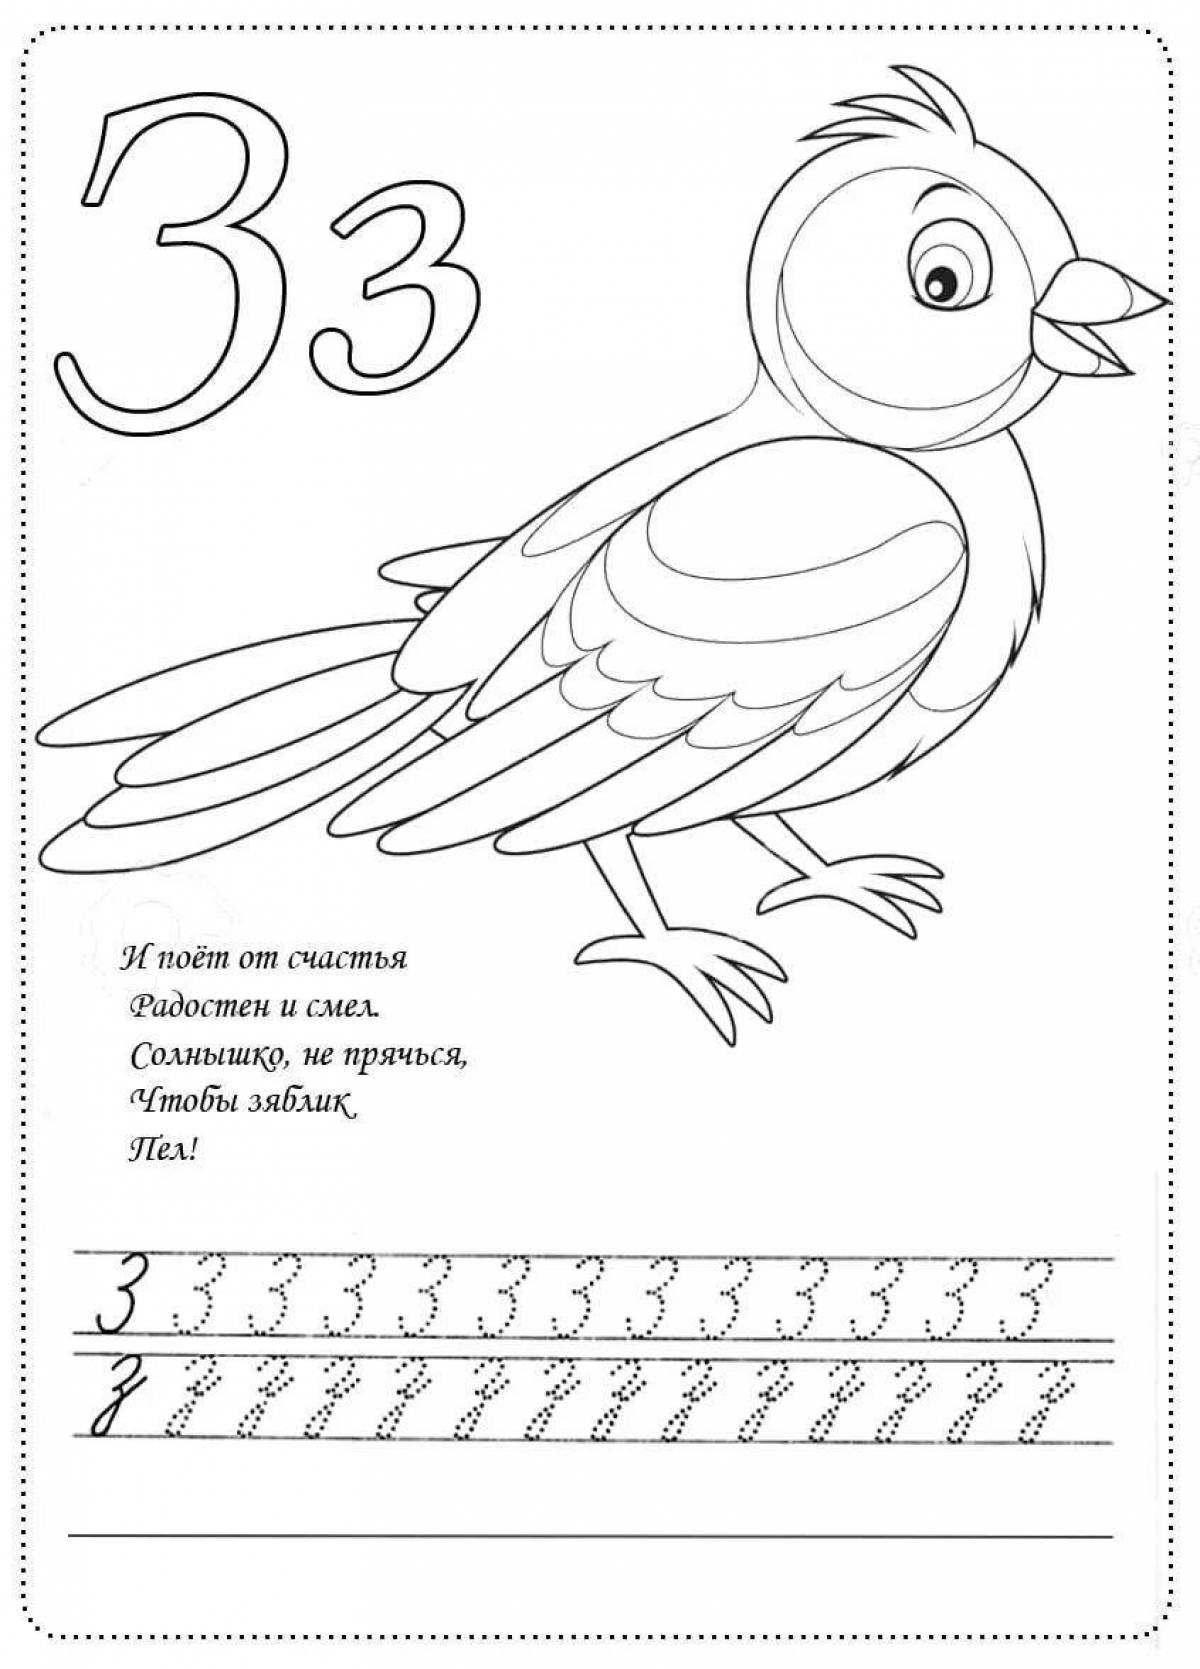 Colorful letter z coloring book